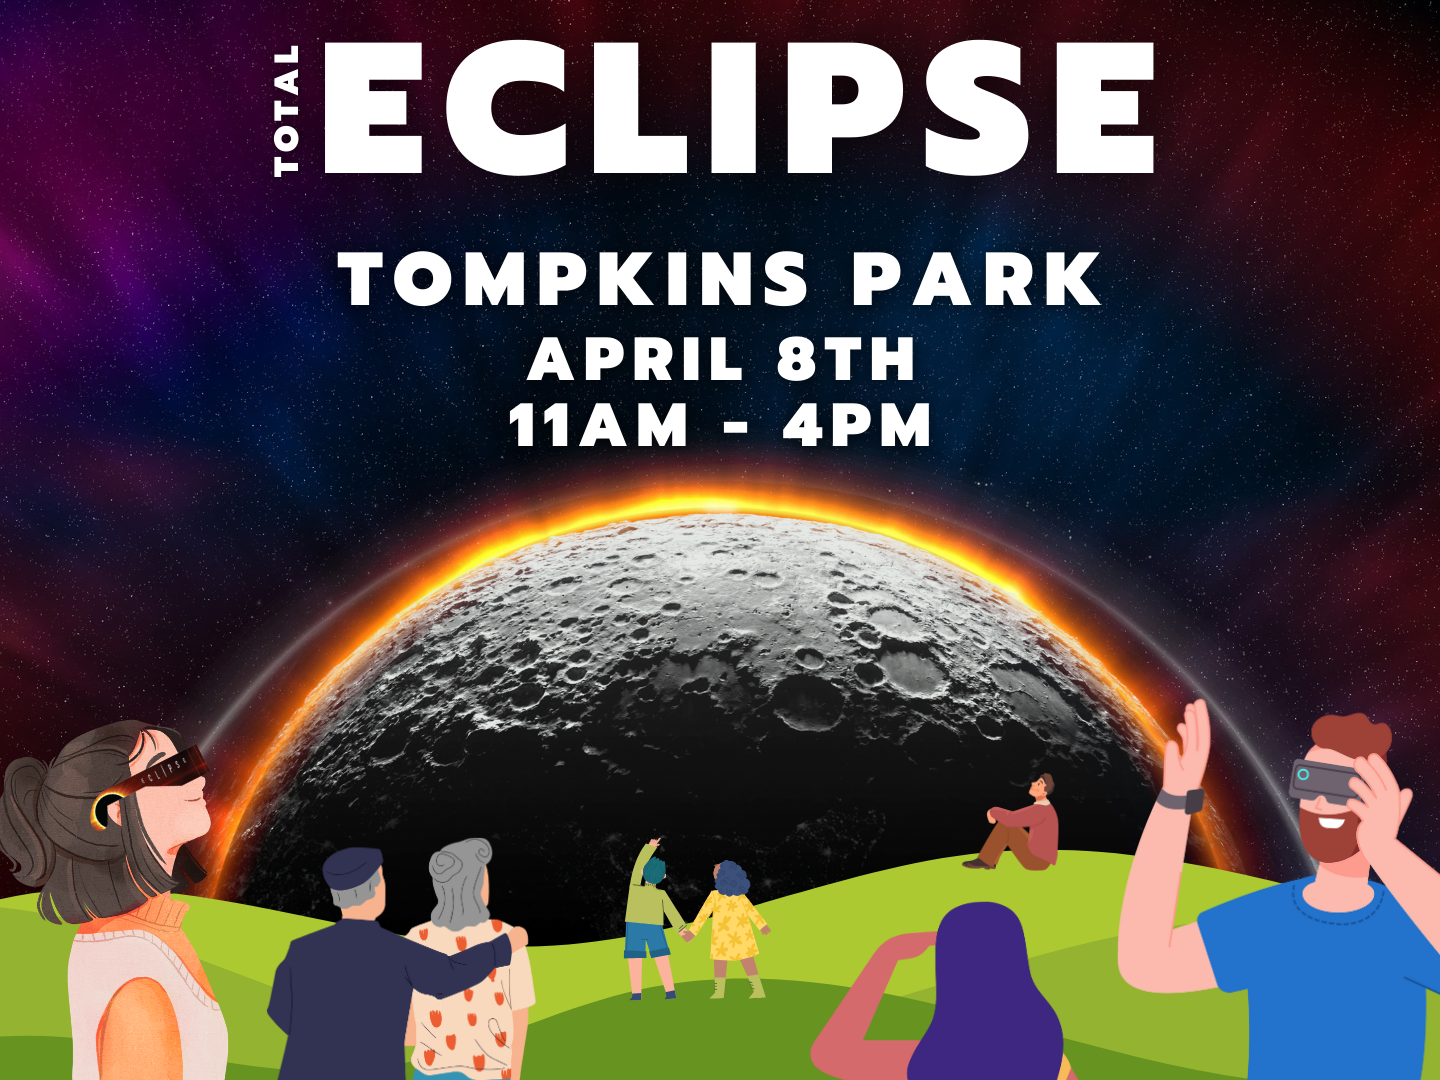 Join us, the John Servider State Farm team, for an unforgettable experience as we gather to witness the celestial wonder of the Total Eclipse! Set against the picturesque backdrop of Tompkins Park in Watertown, NY, our booth will be a hub of excitement and activity.

In addition to enjoying the eclipse, take advantage of the opportunity to learn more about insurance and financial planning from our knowledgeable staff. Don't miss out on this unique opportunity to join us under the darkened sky.

April 8th

11am - 4pm

Historic Tompkins Park

Watertown, NY